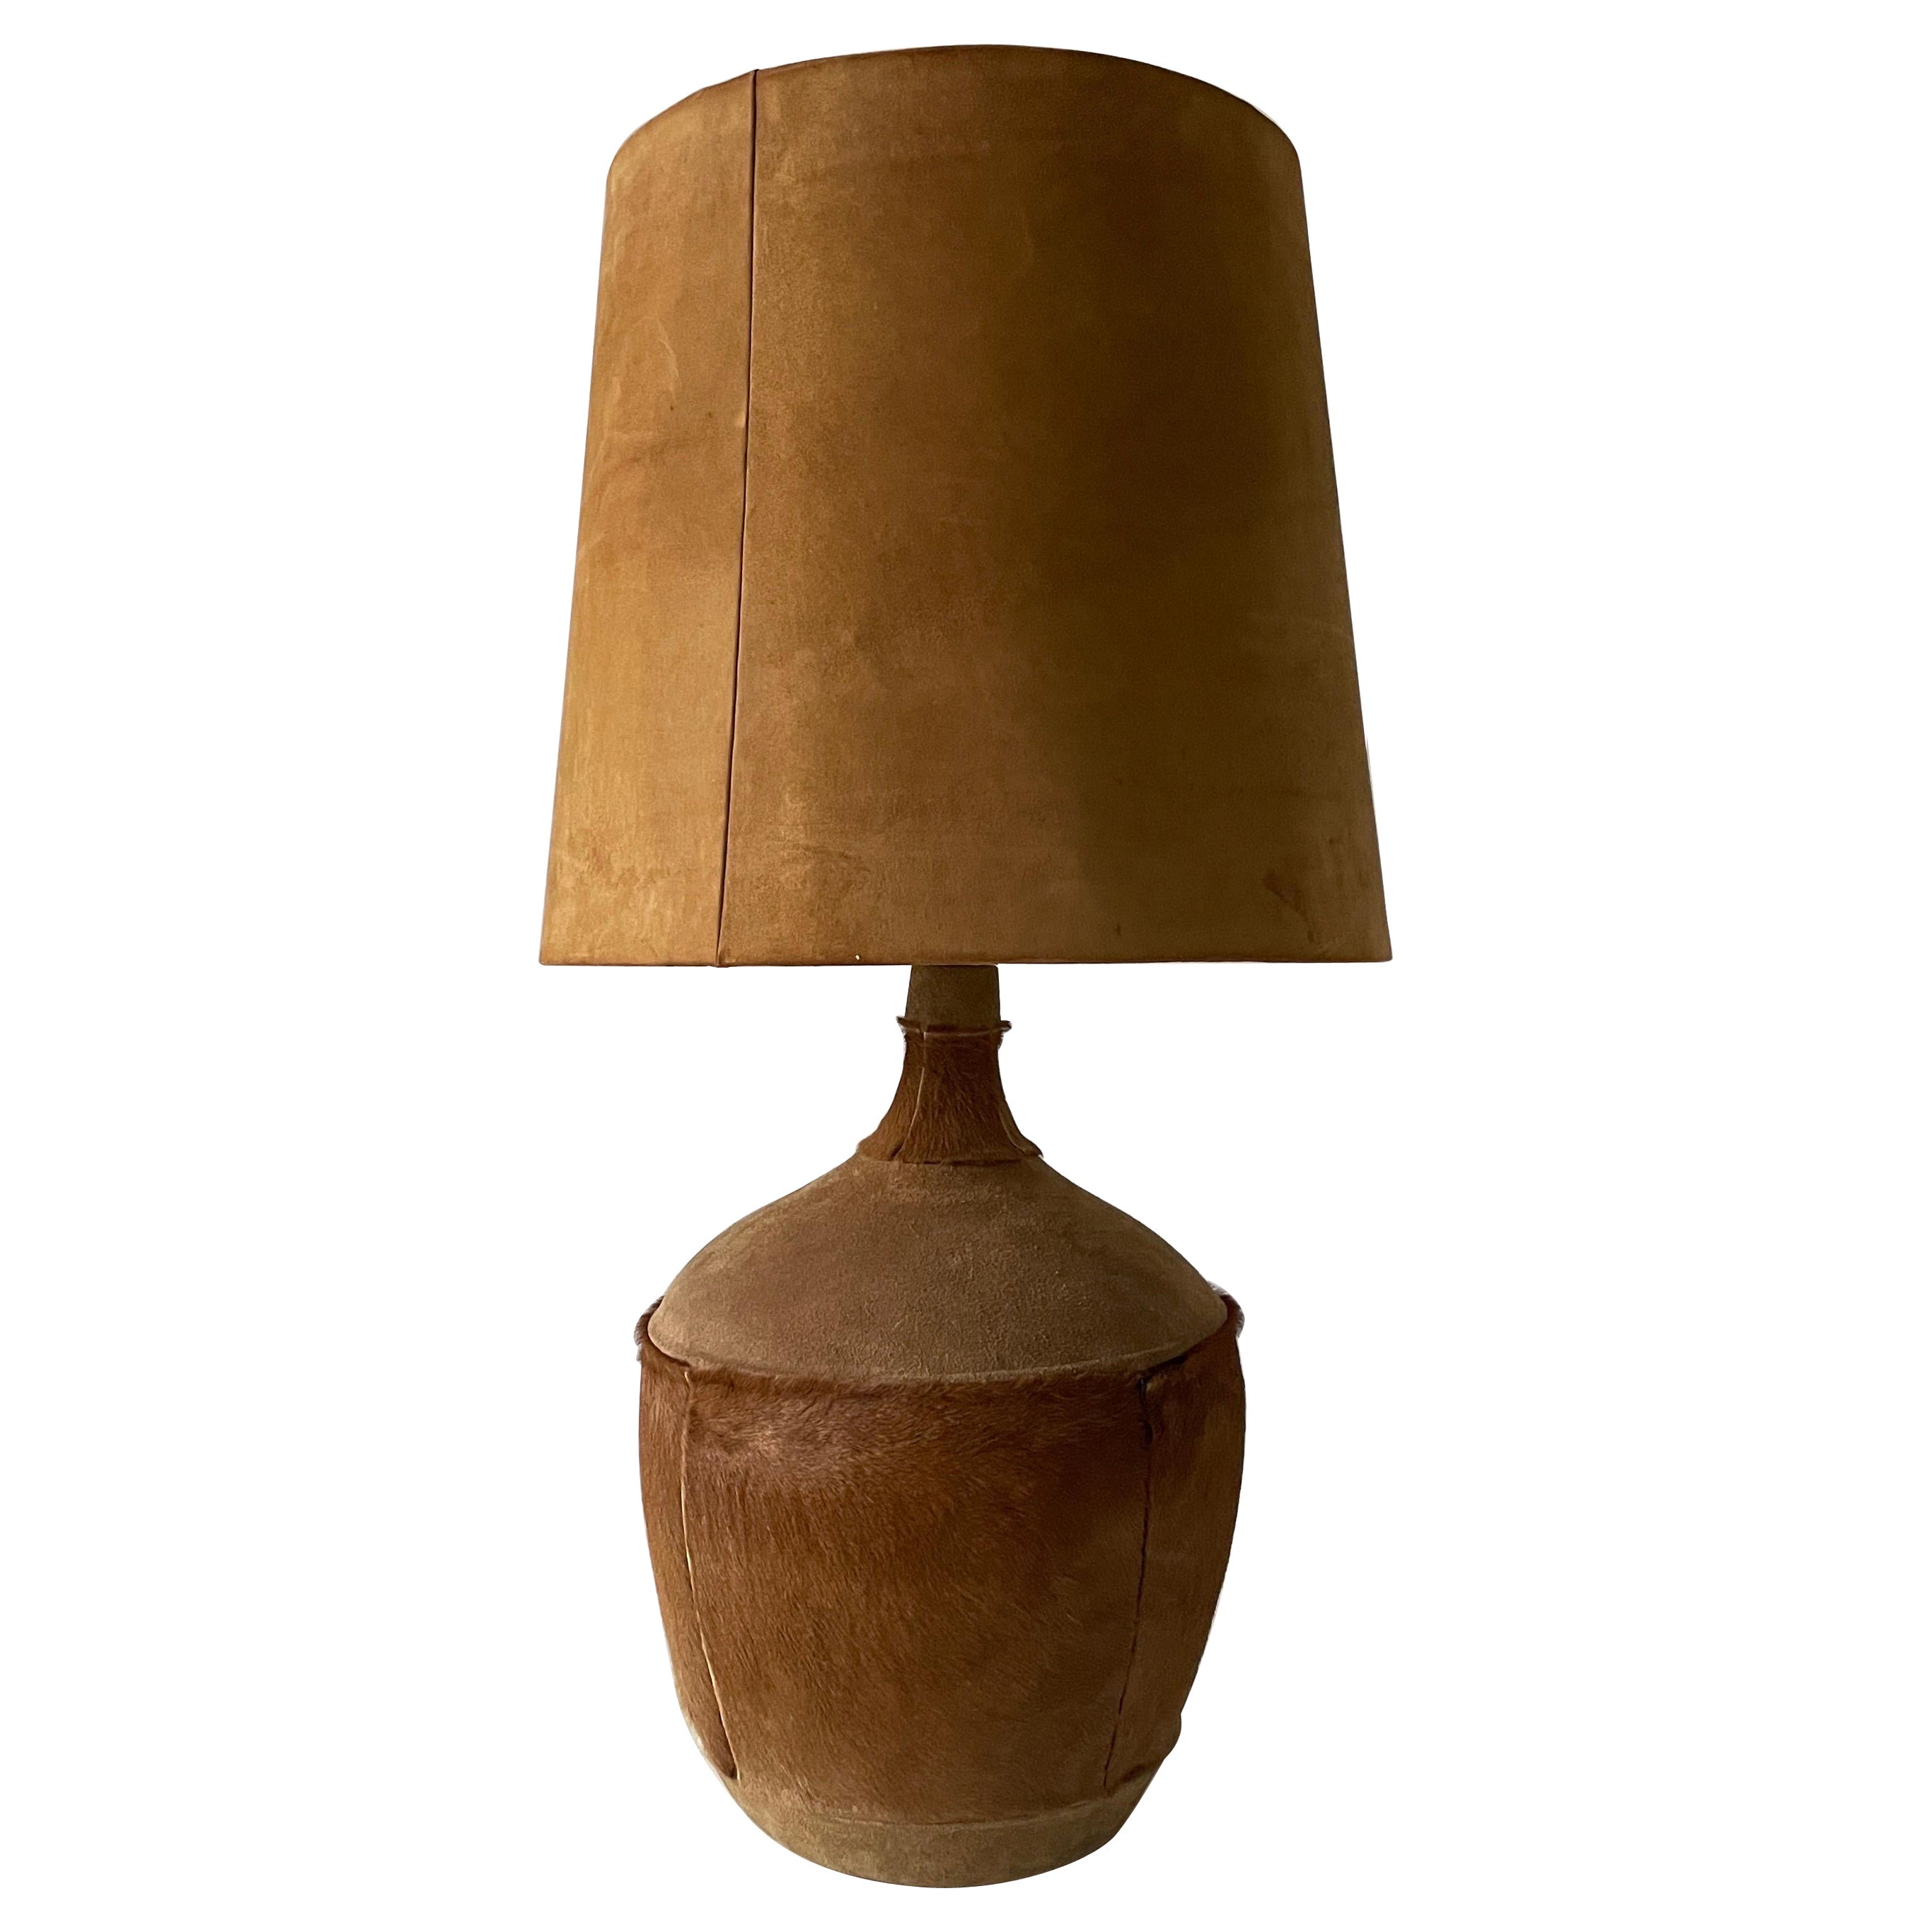 Tan Suede Leather and Glass Shade Floor or Table Lamp, 1960s, Denmark